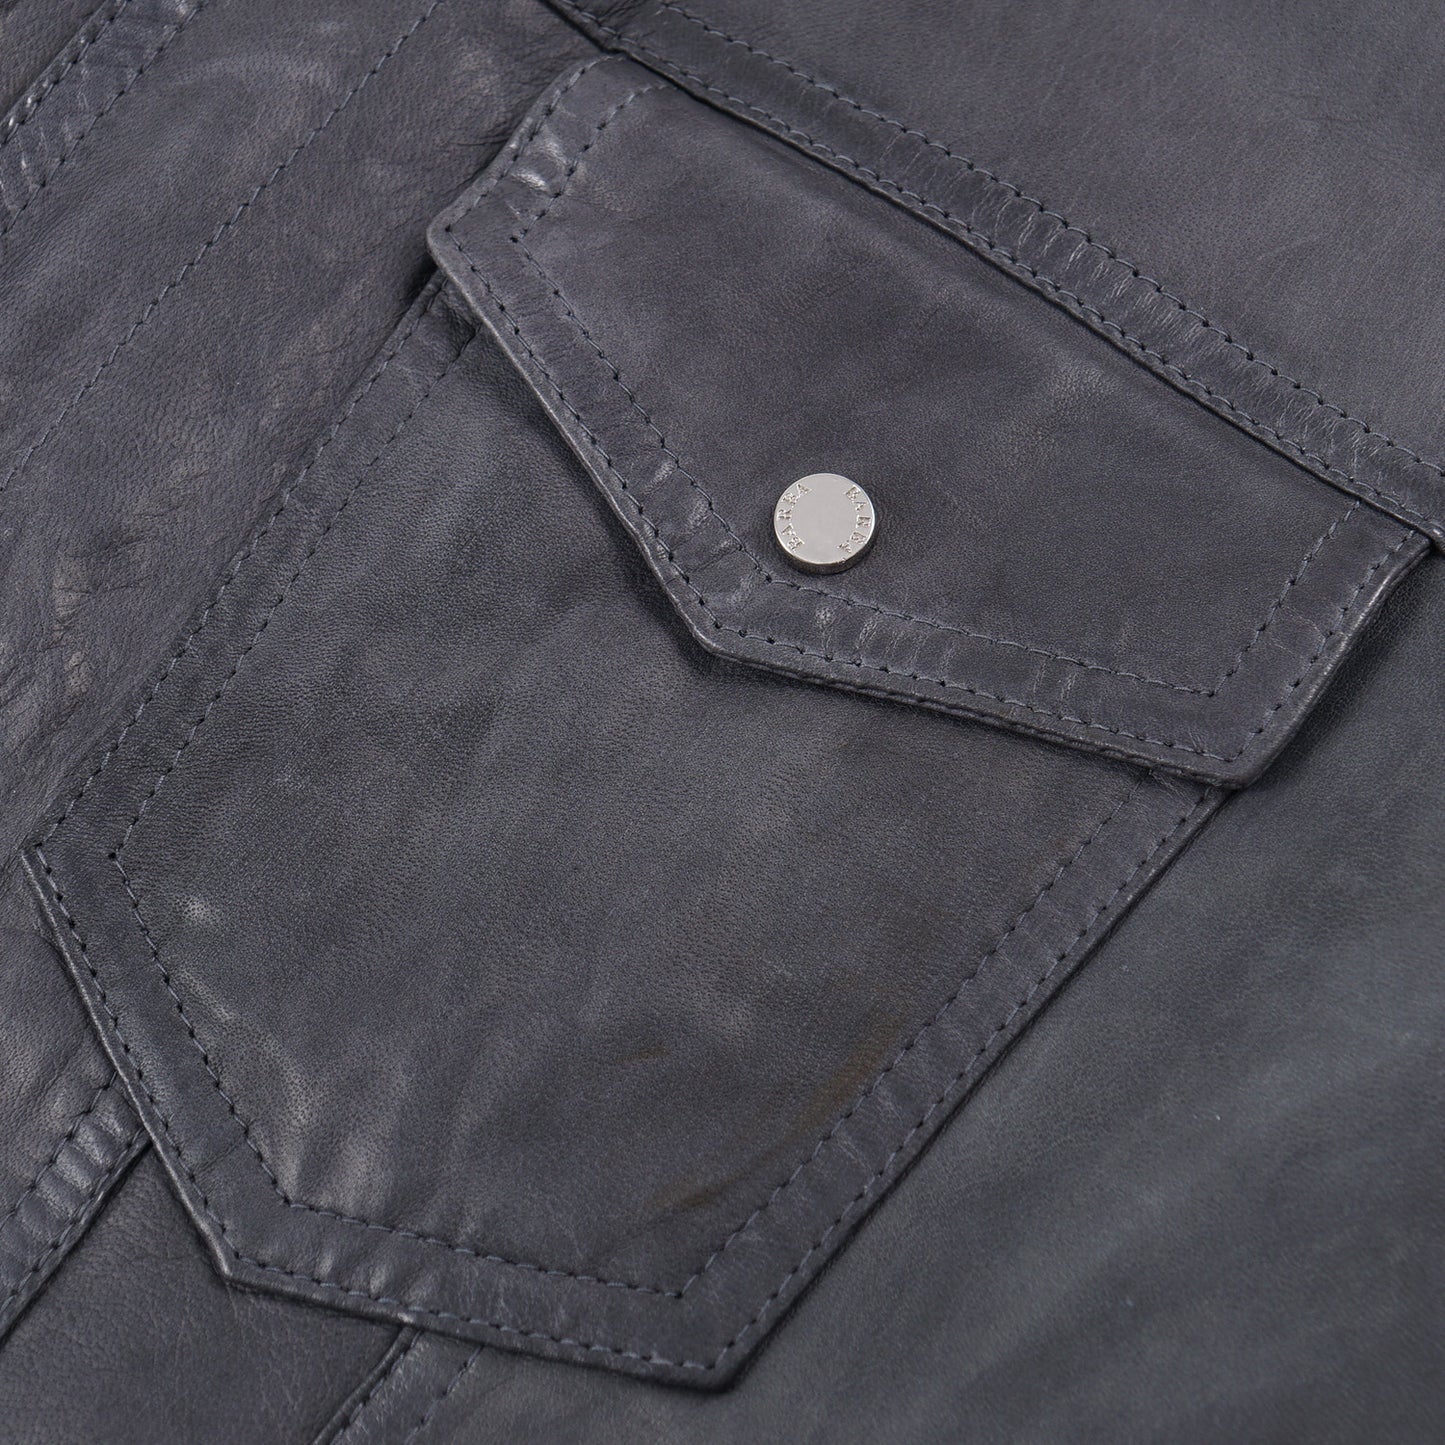 Barba Leather Jacket with Down-Filled Lining - Top Shelf Apparel